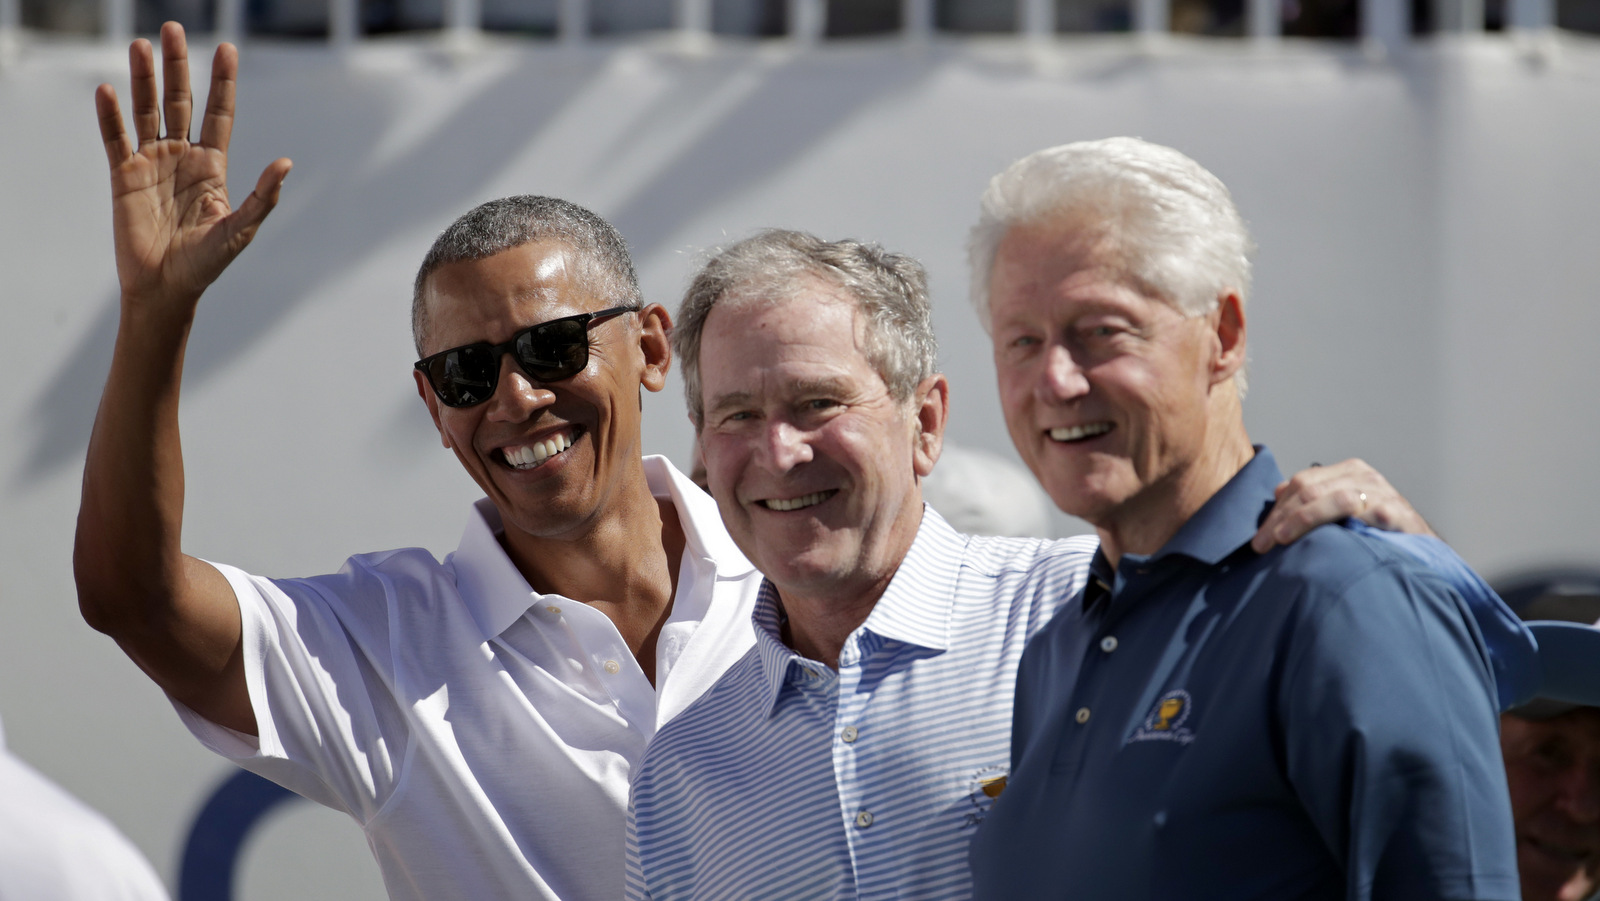 Former U.S. Presidents, from left, Barack Obama, George Bush and Bill Clinton greet spectators on the first tee before the first round of the Presidents Cup at Liberty National Golf Club in Jersey City, N.J., Sept. 28, 2017. (AP/Julio Cortez)